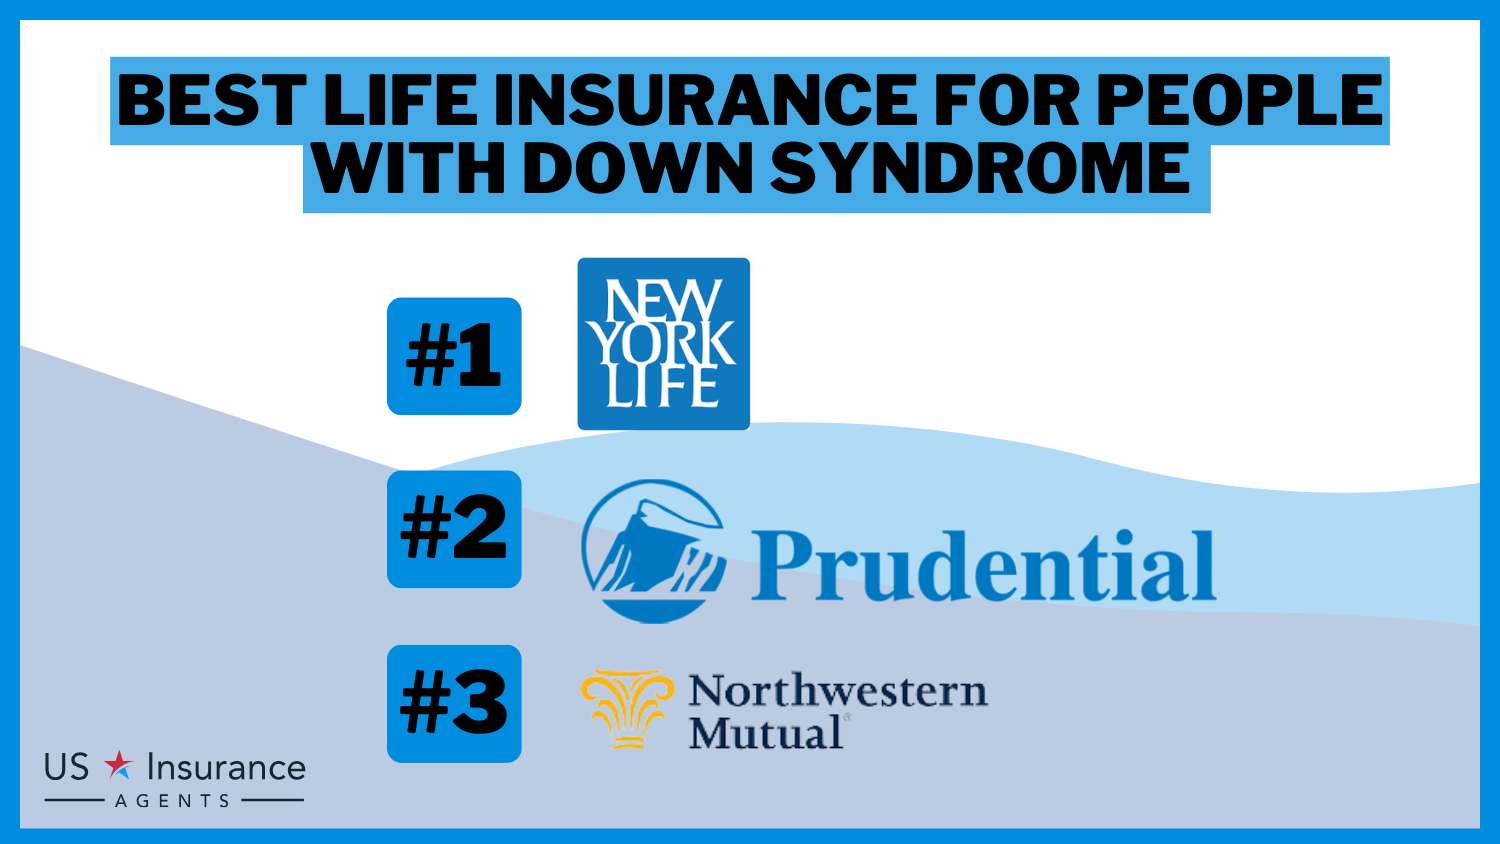 3 Best Life Insurance for People With Down Syndrome: New York Life, Prudential, Northwestern Mutual.